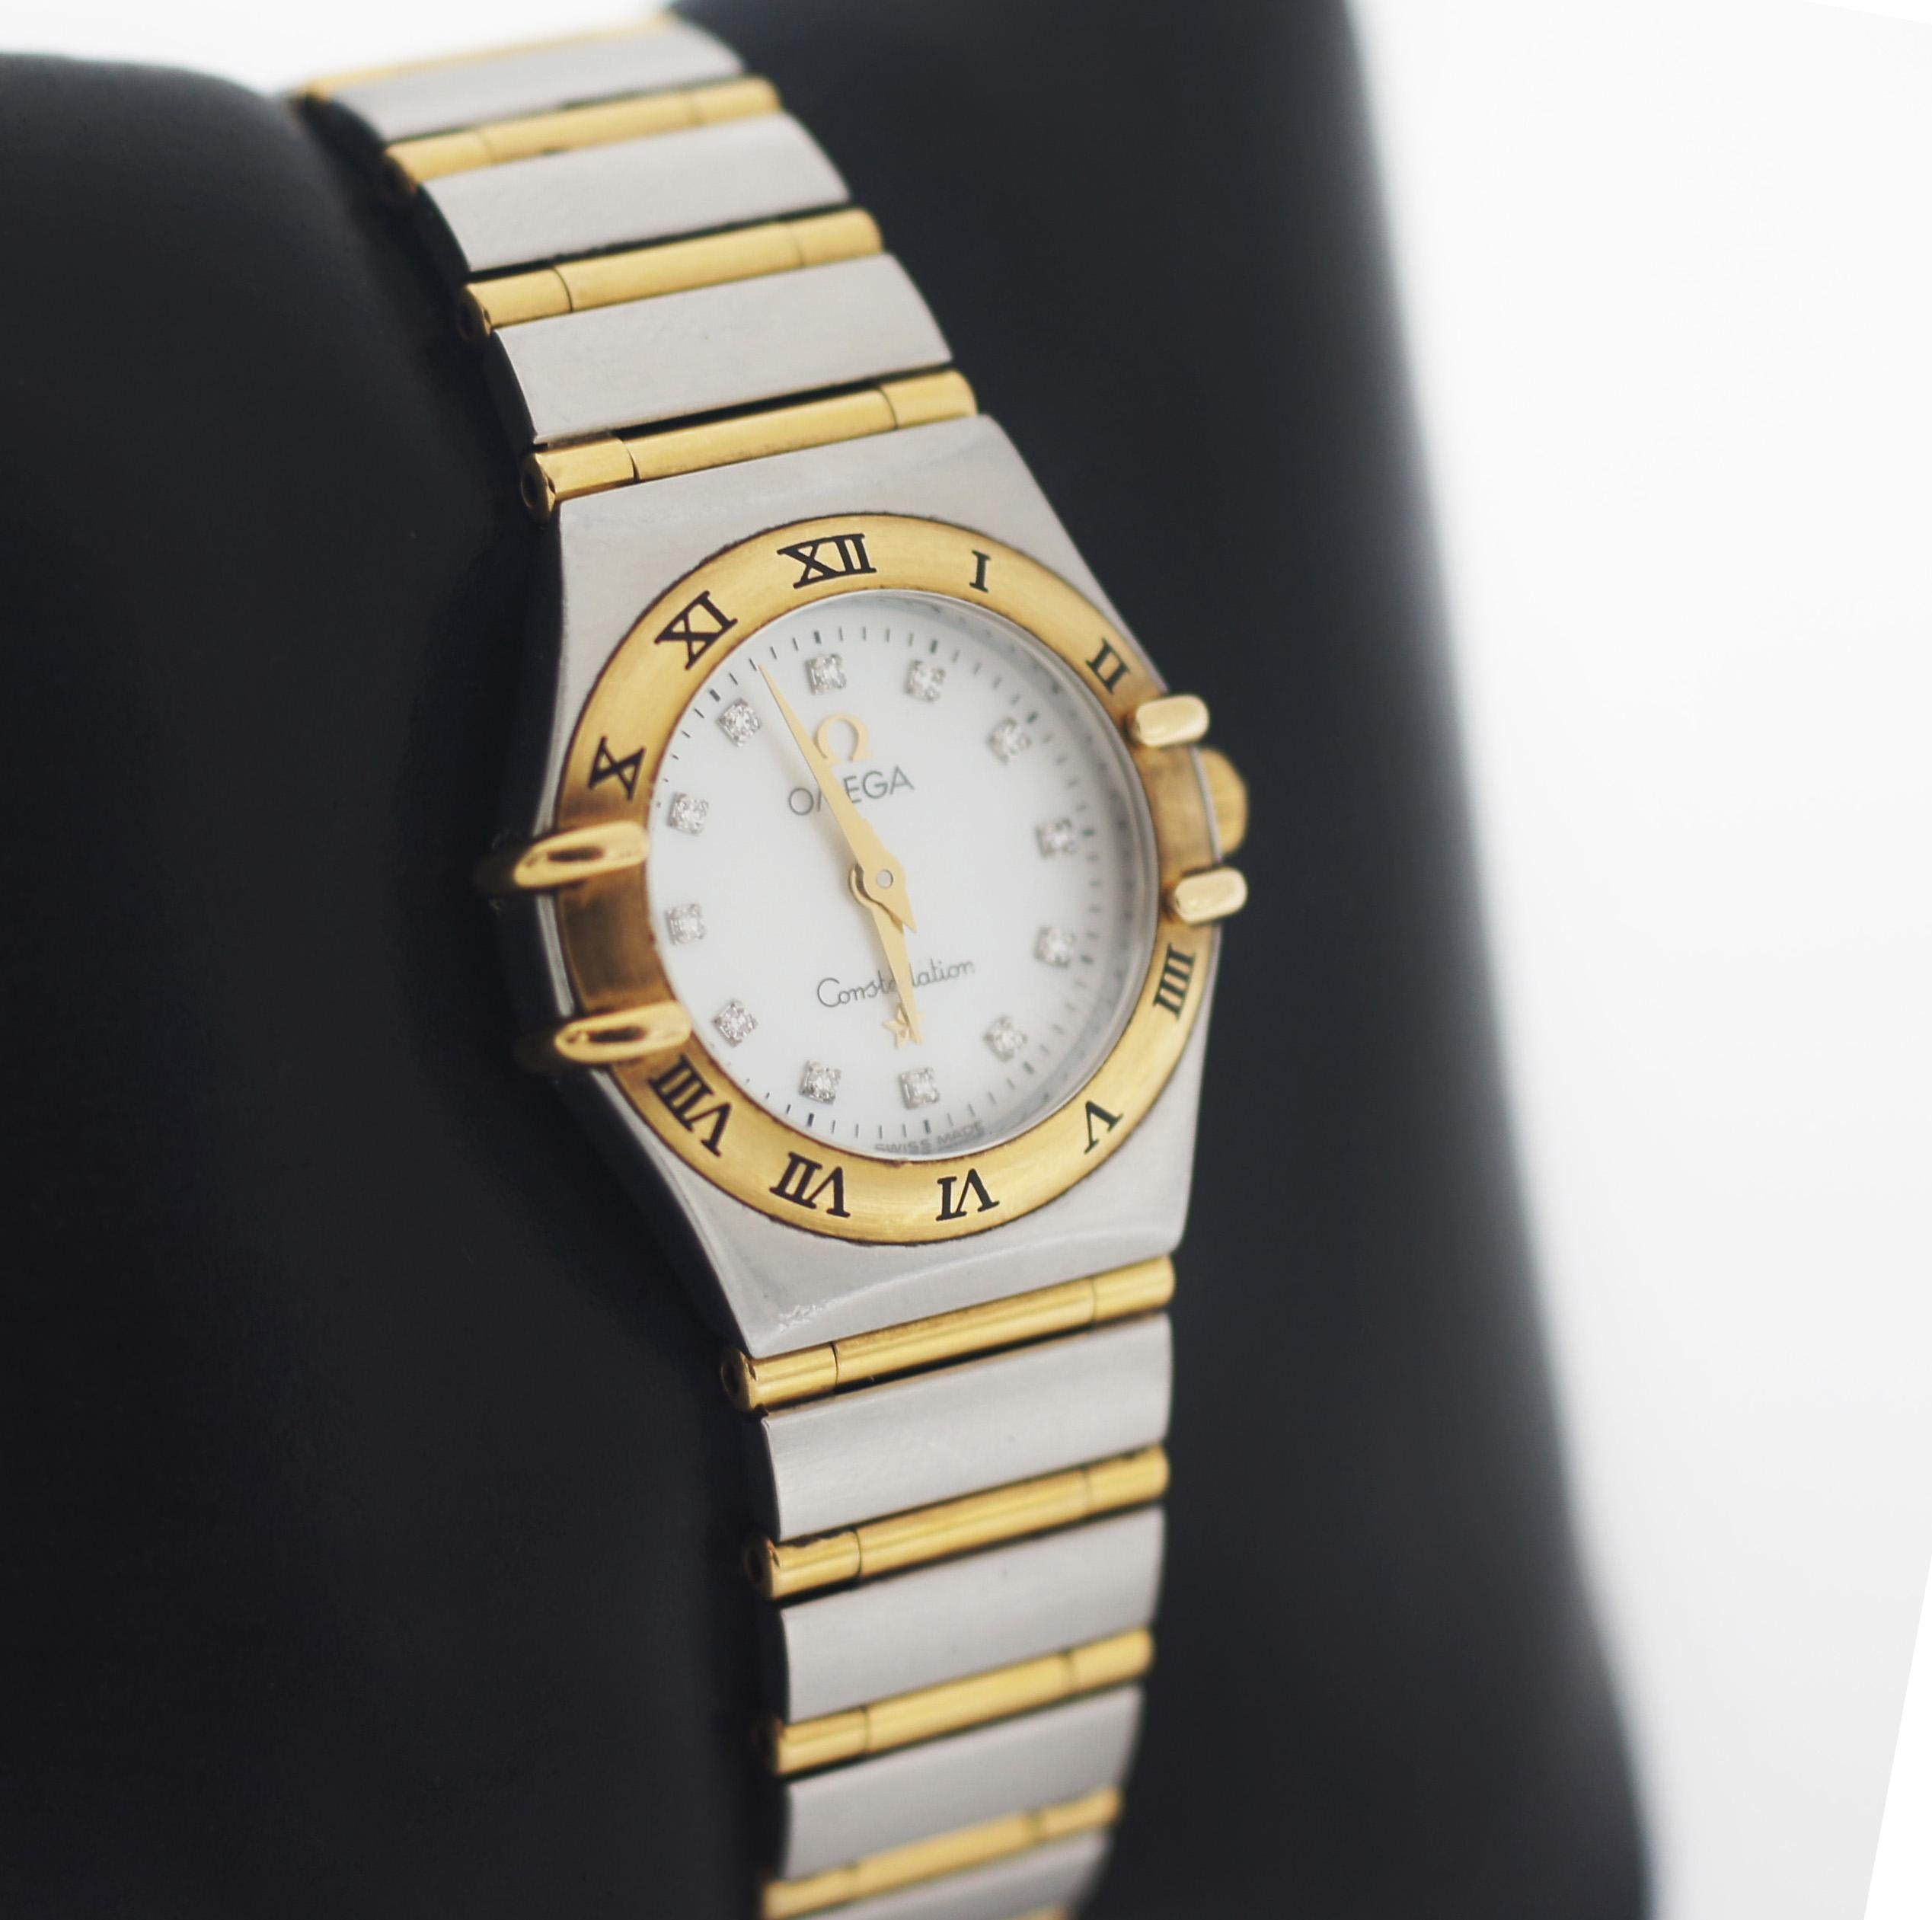 Omega

Constellation

Mother of Pearl Dial 

Diamond hour Markers

Gold sword hour minute hands

stainless steel case

gold bezel with hour roman numerals

Approx. case measures 23mm

Quartz Omega movement
Stainless Steel and Bar gold Bracelet